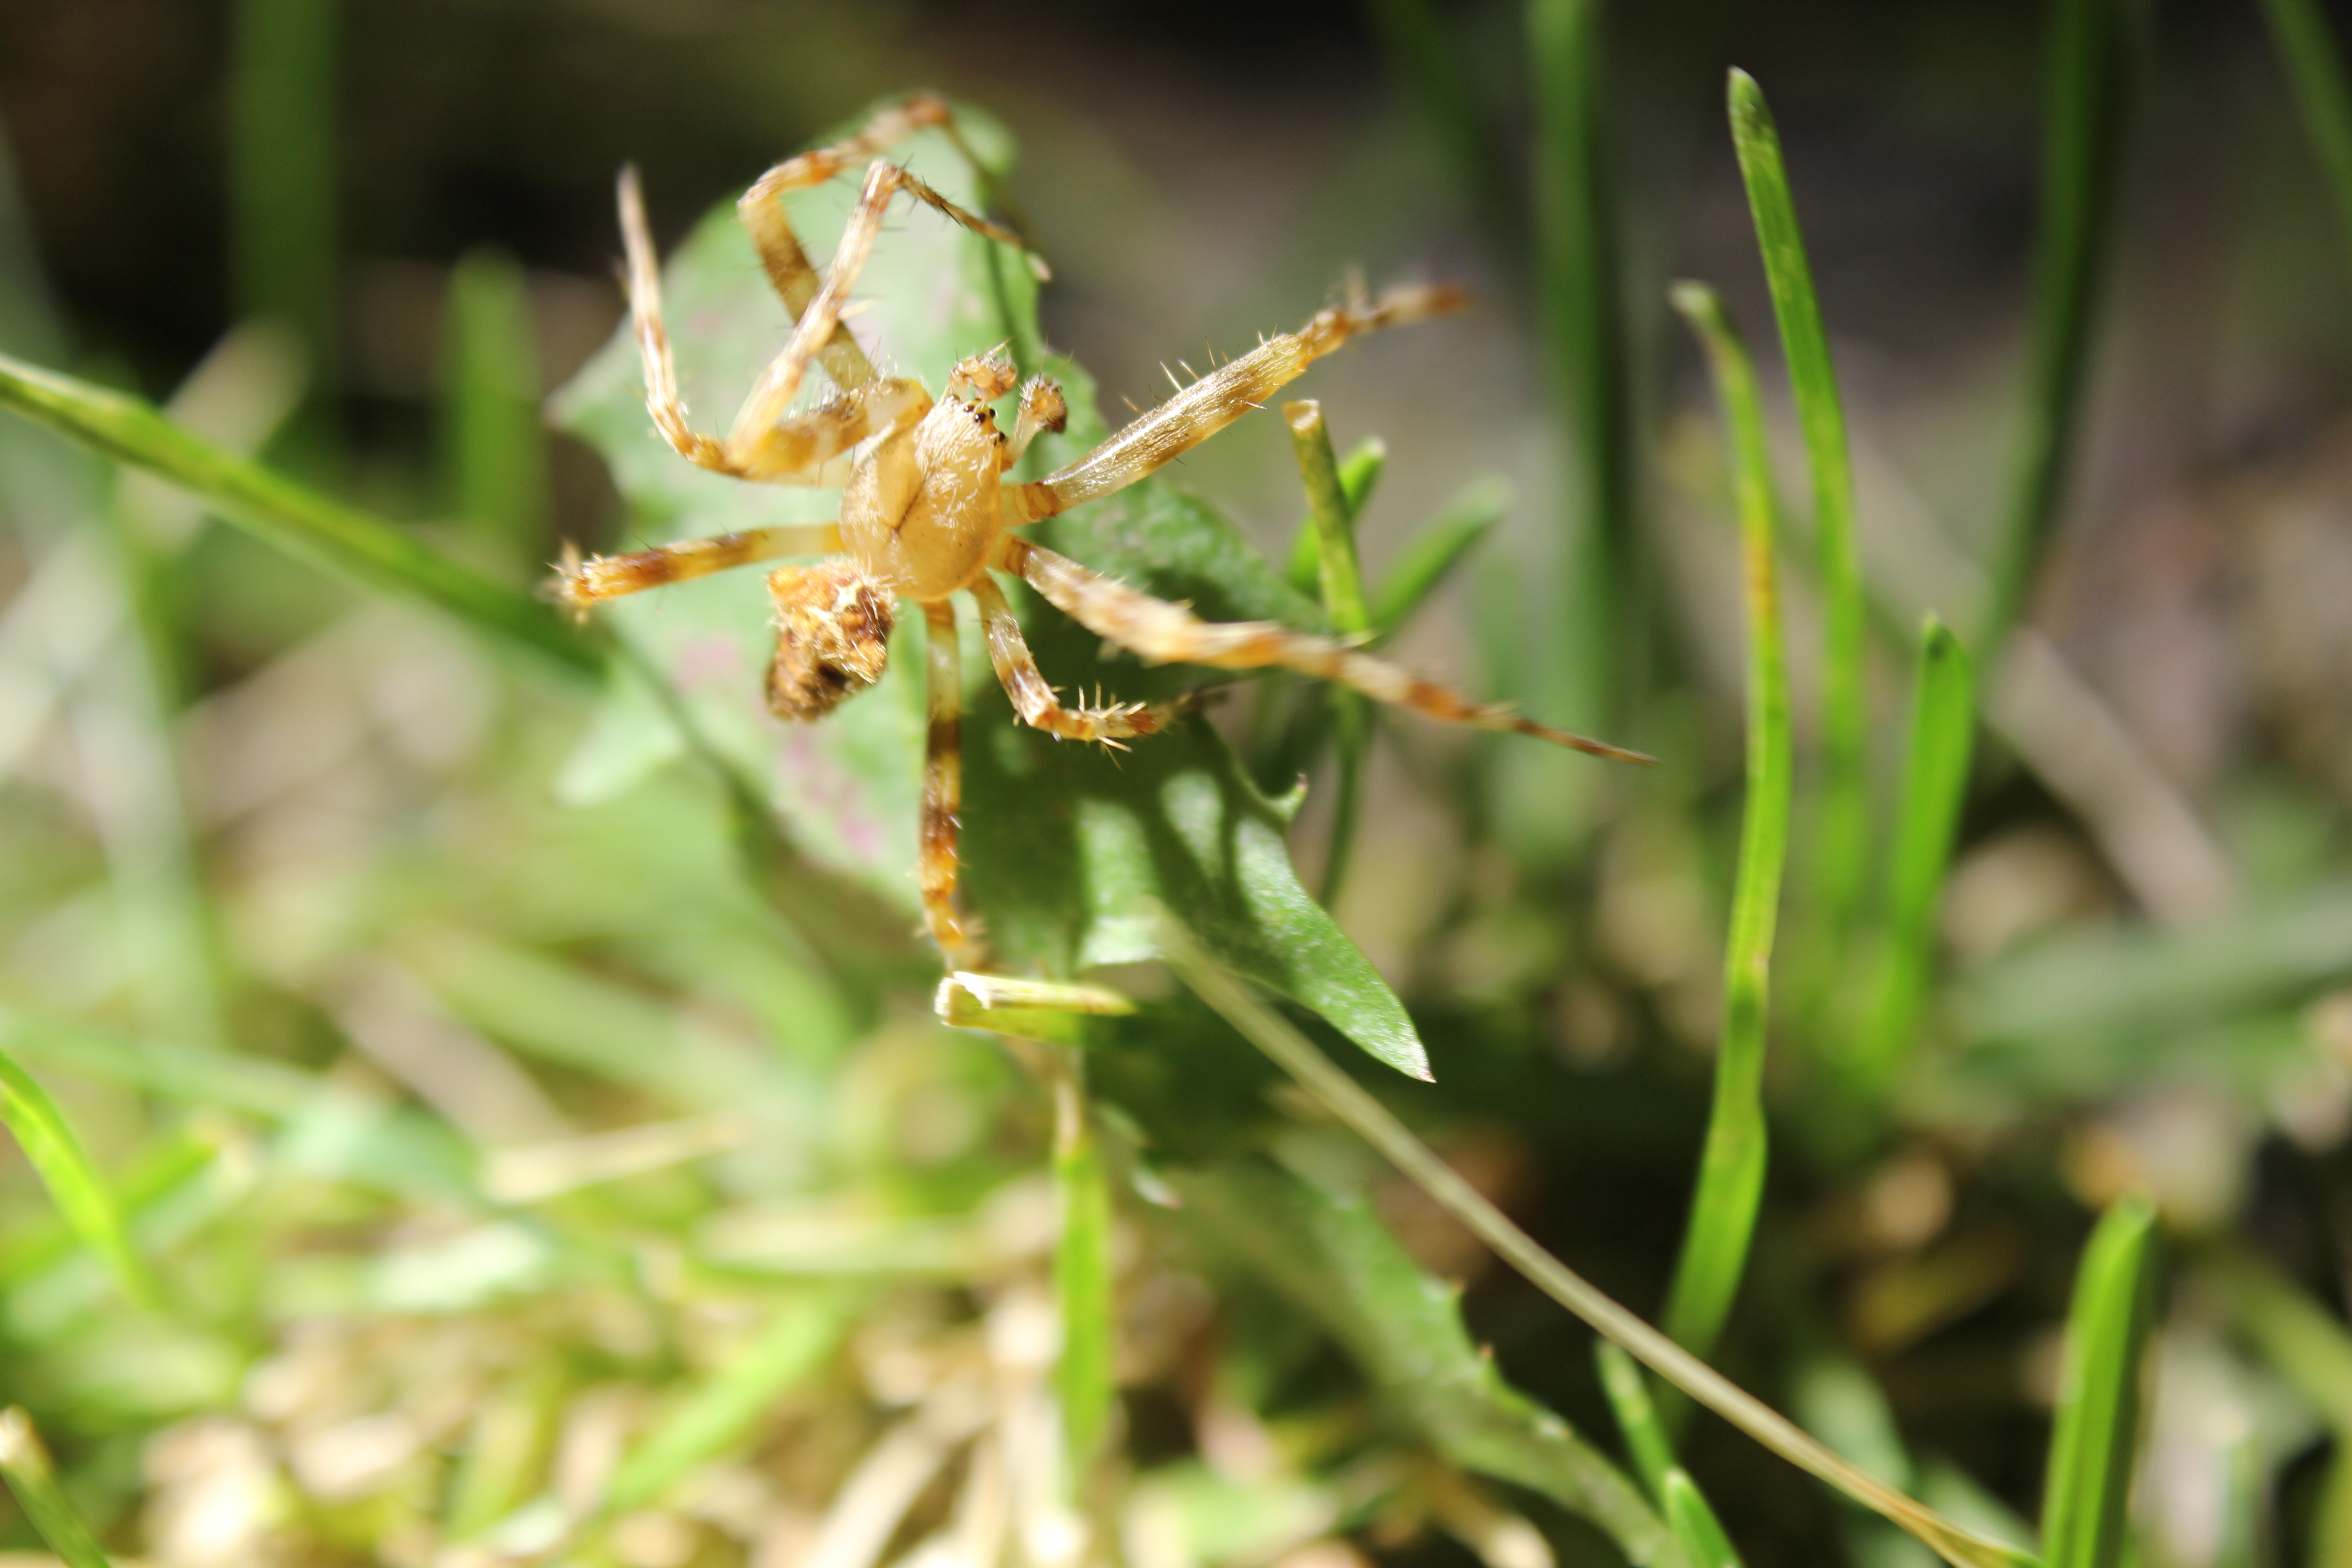 This figure shows an up-close photo of a male cat-faced spider in some grass.